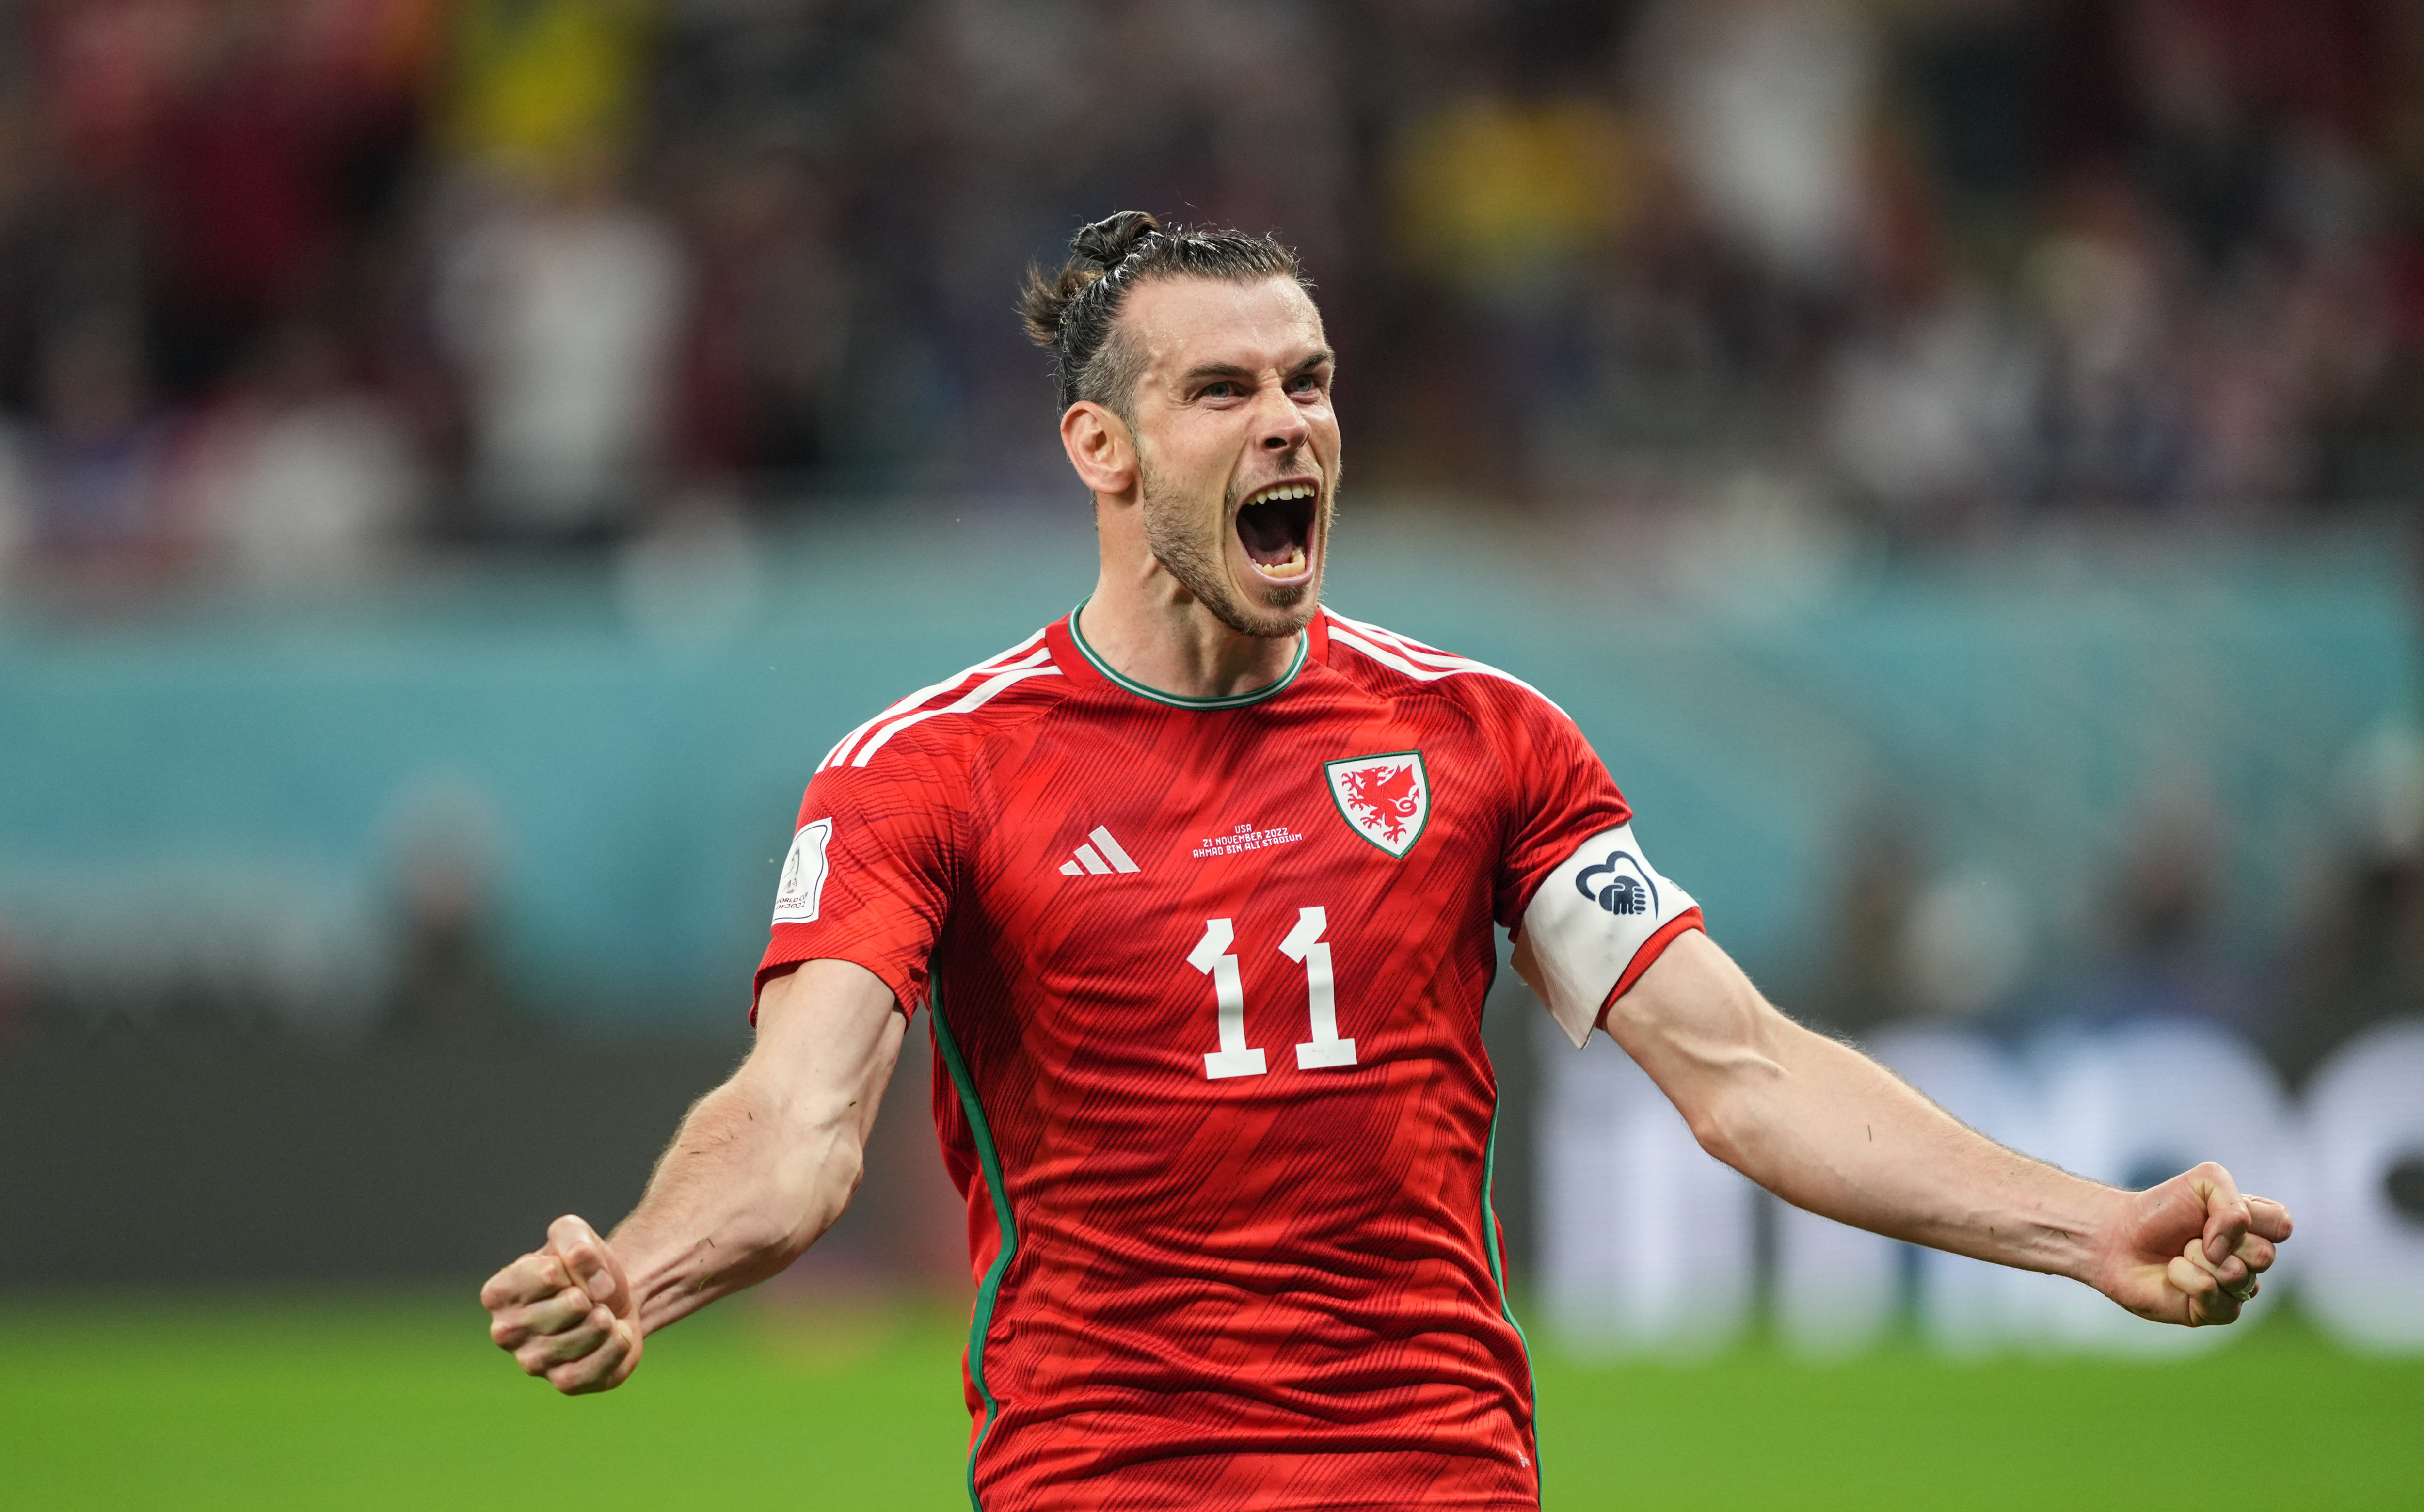 Gareth Bale celebrates after scoring for Wales at the 2022 World Cup.